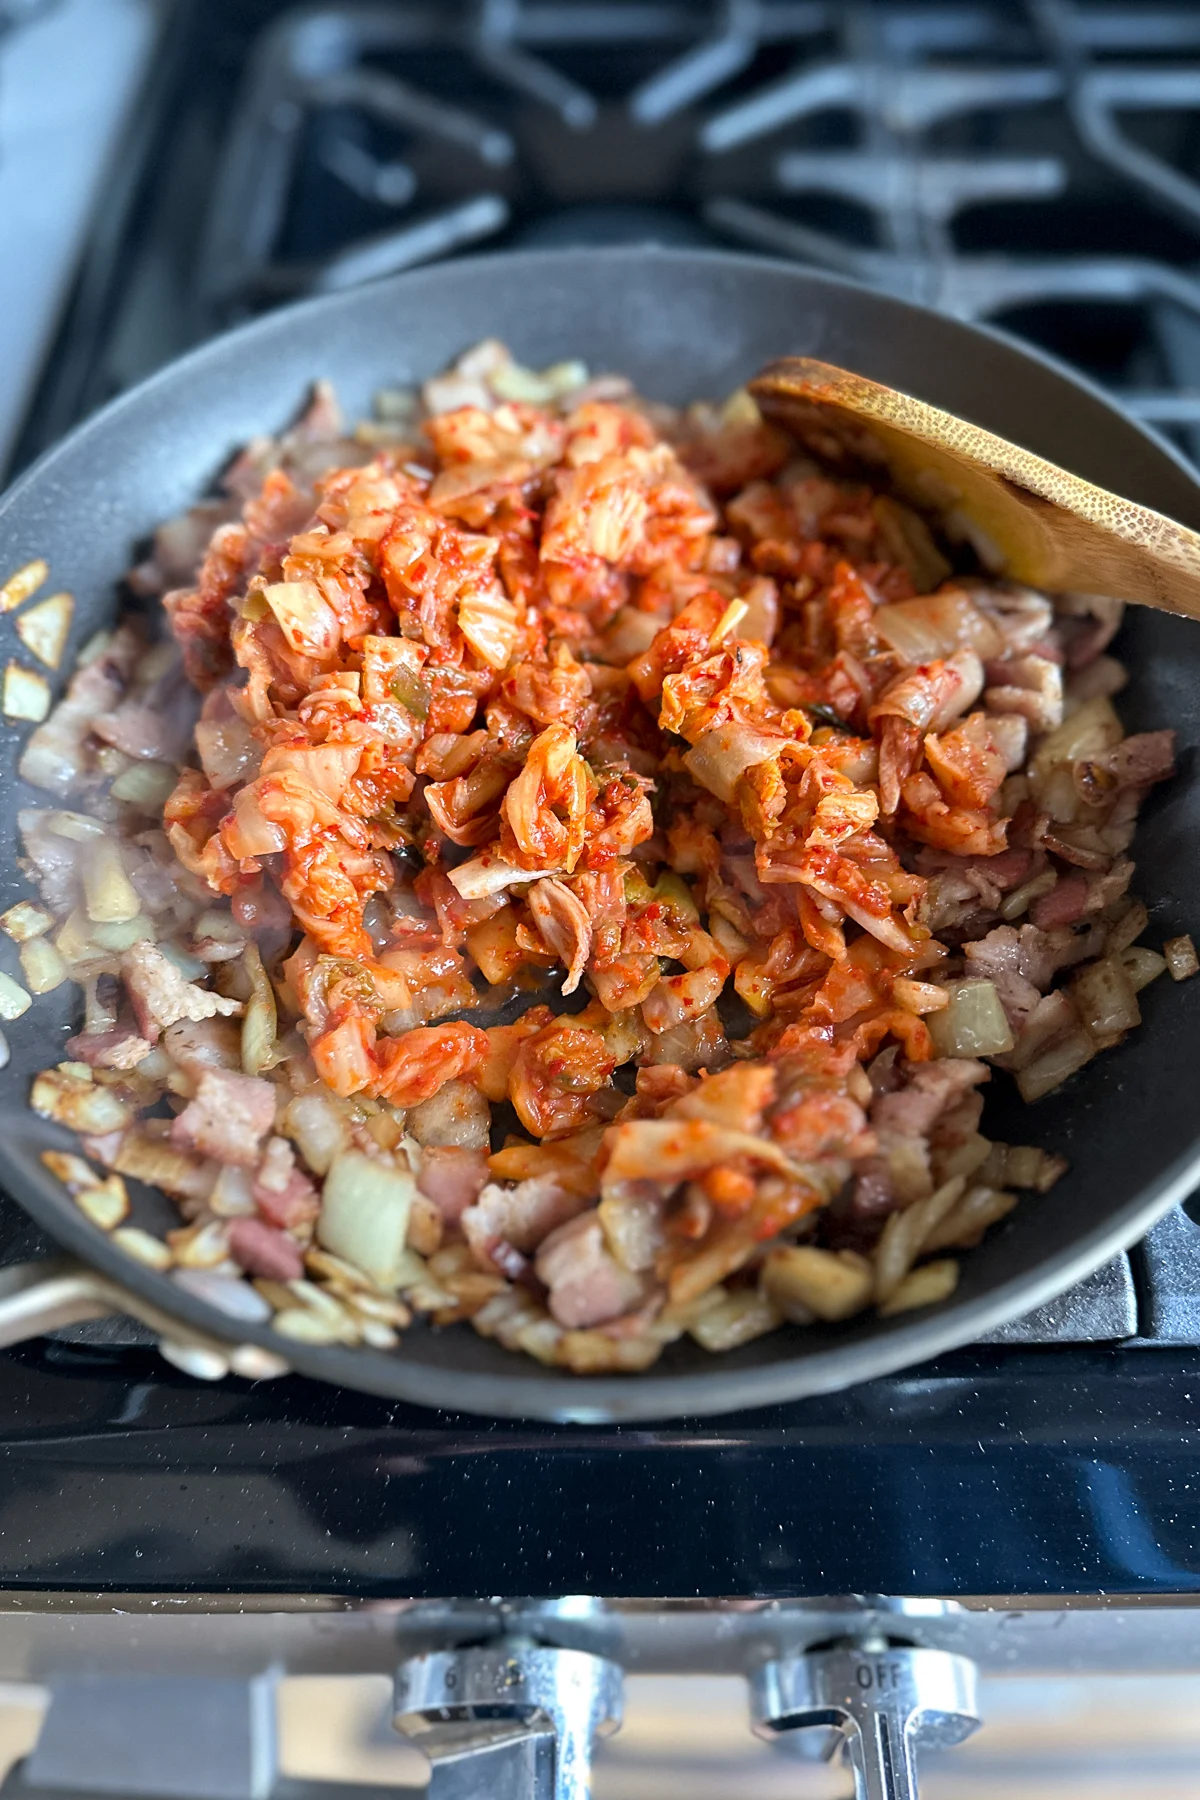 Cooking onions, bacon, and kimchi to make kimchi fried rice.